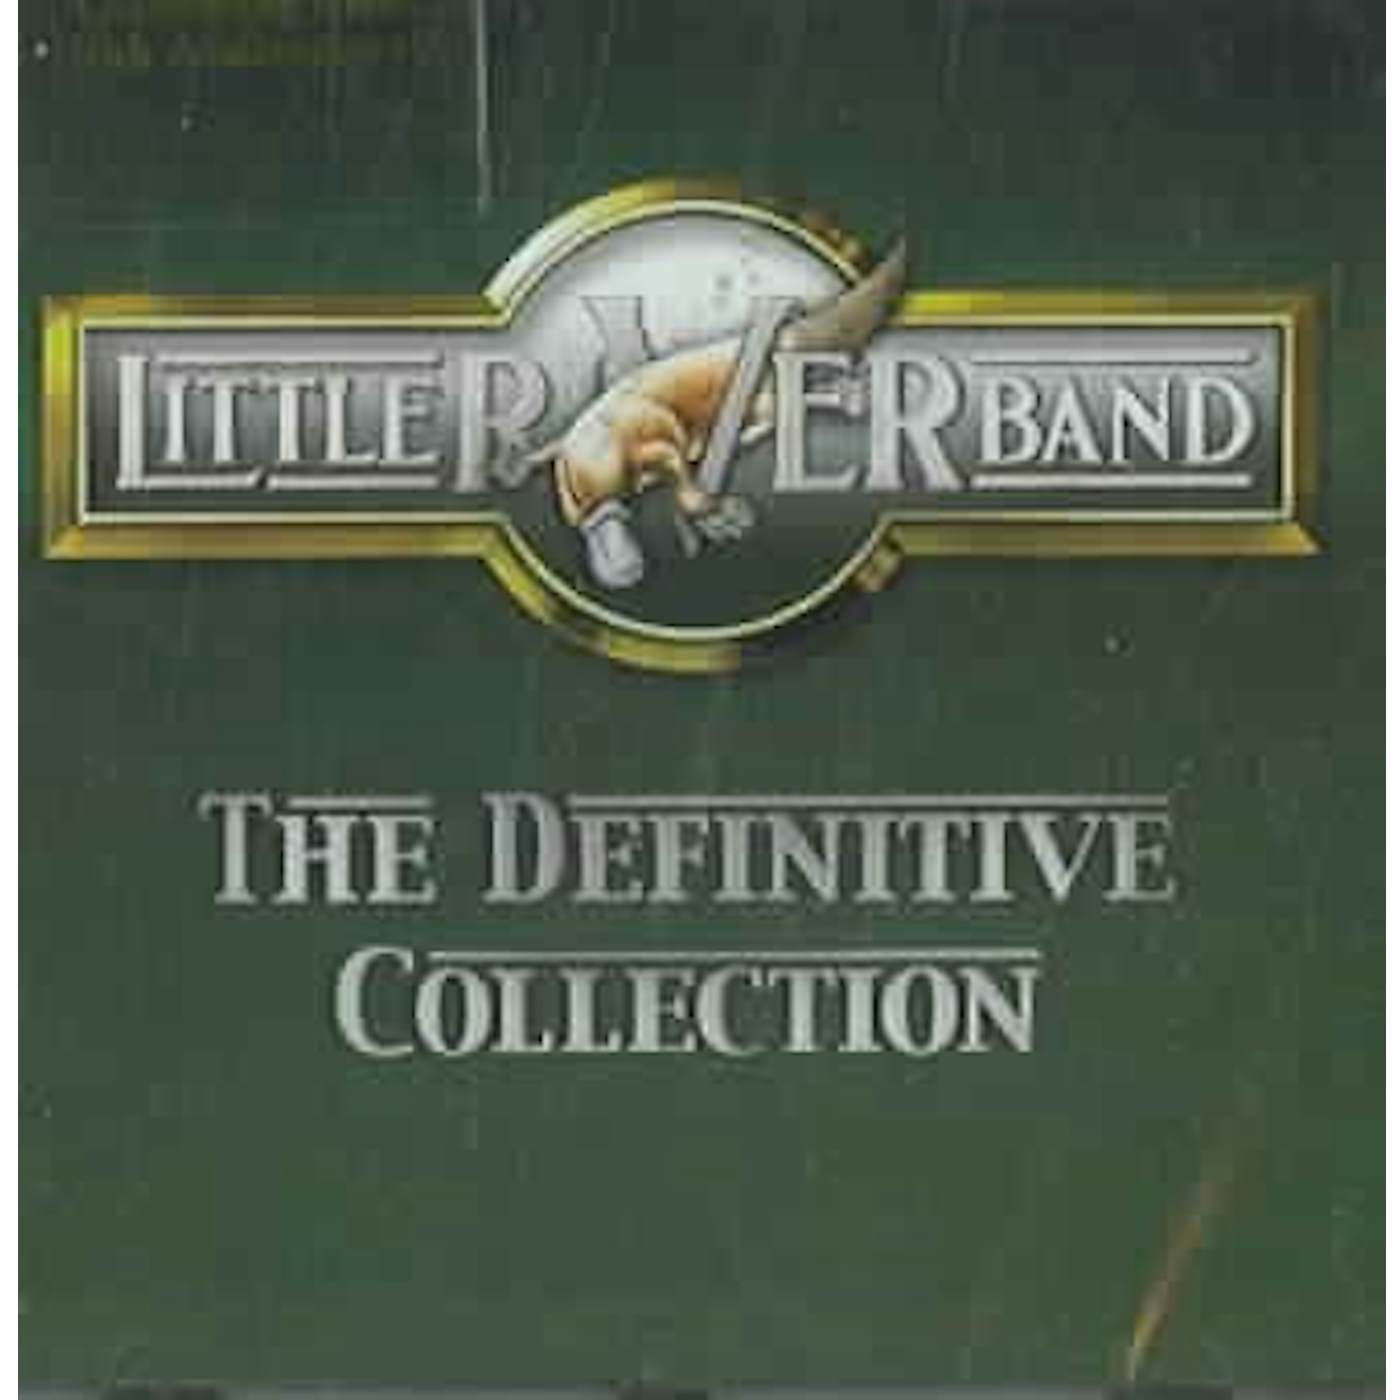 Little River Band The Definitive Collection CD